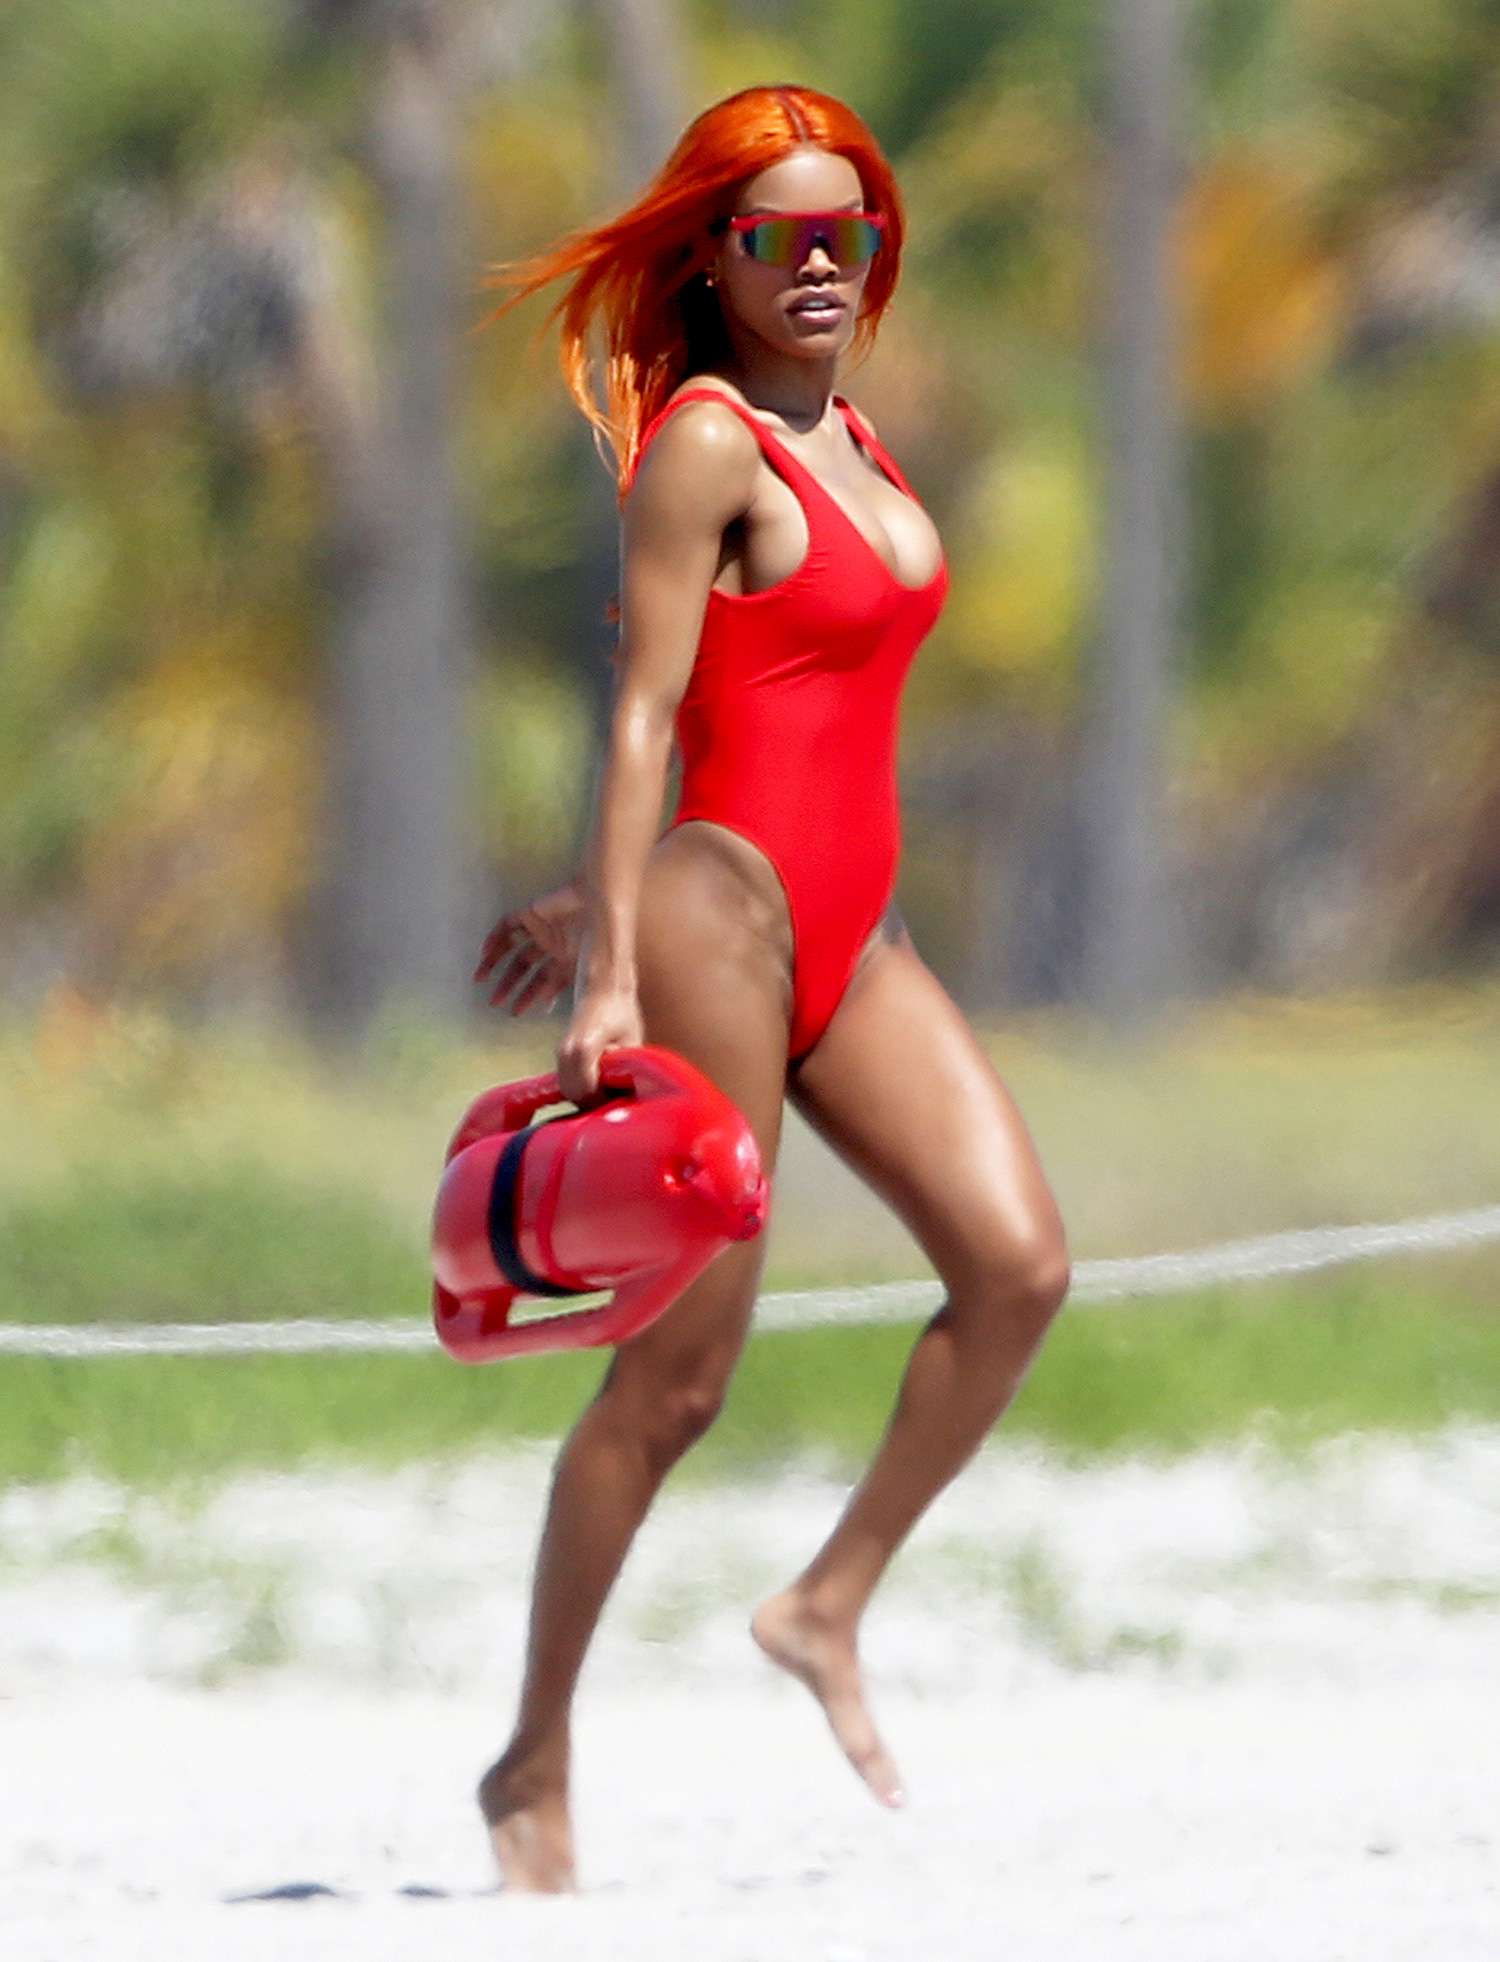 Singer and Model Teyana Taylor Wears A Cheeky Red Swimsuit During A Photoshoot On The Beach In Miami